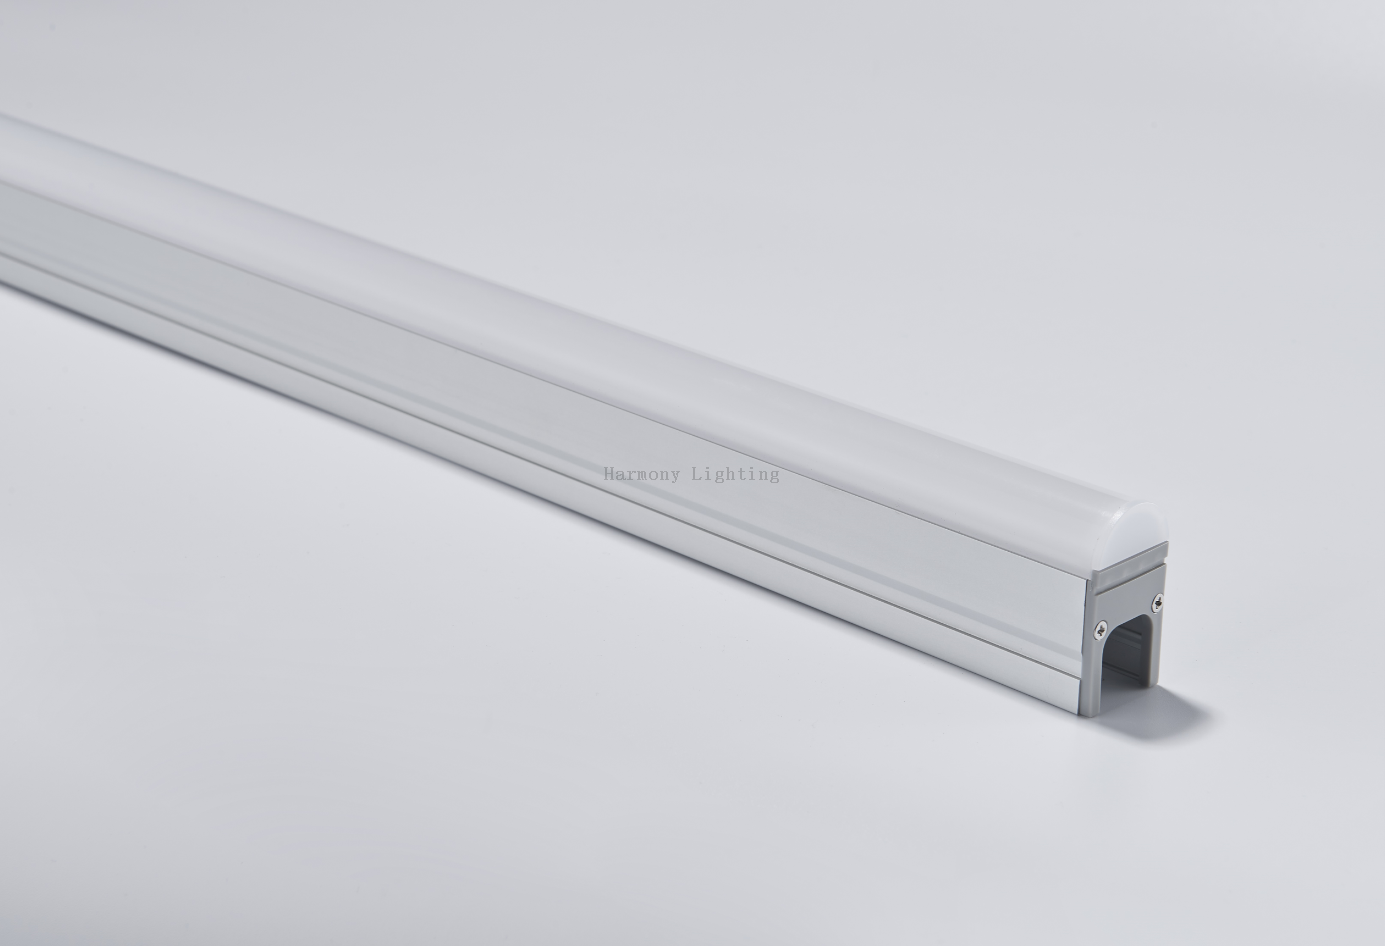 RH-C25 12W IP67 Hot Product Wholesale 12W Aluminum IP65 Outdoor Recessed Led Linear Light IP65